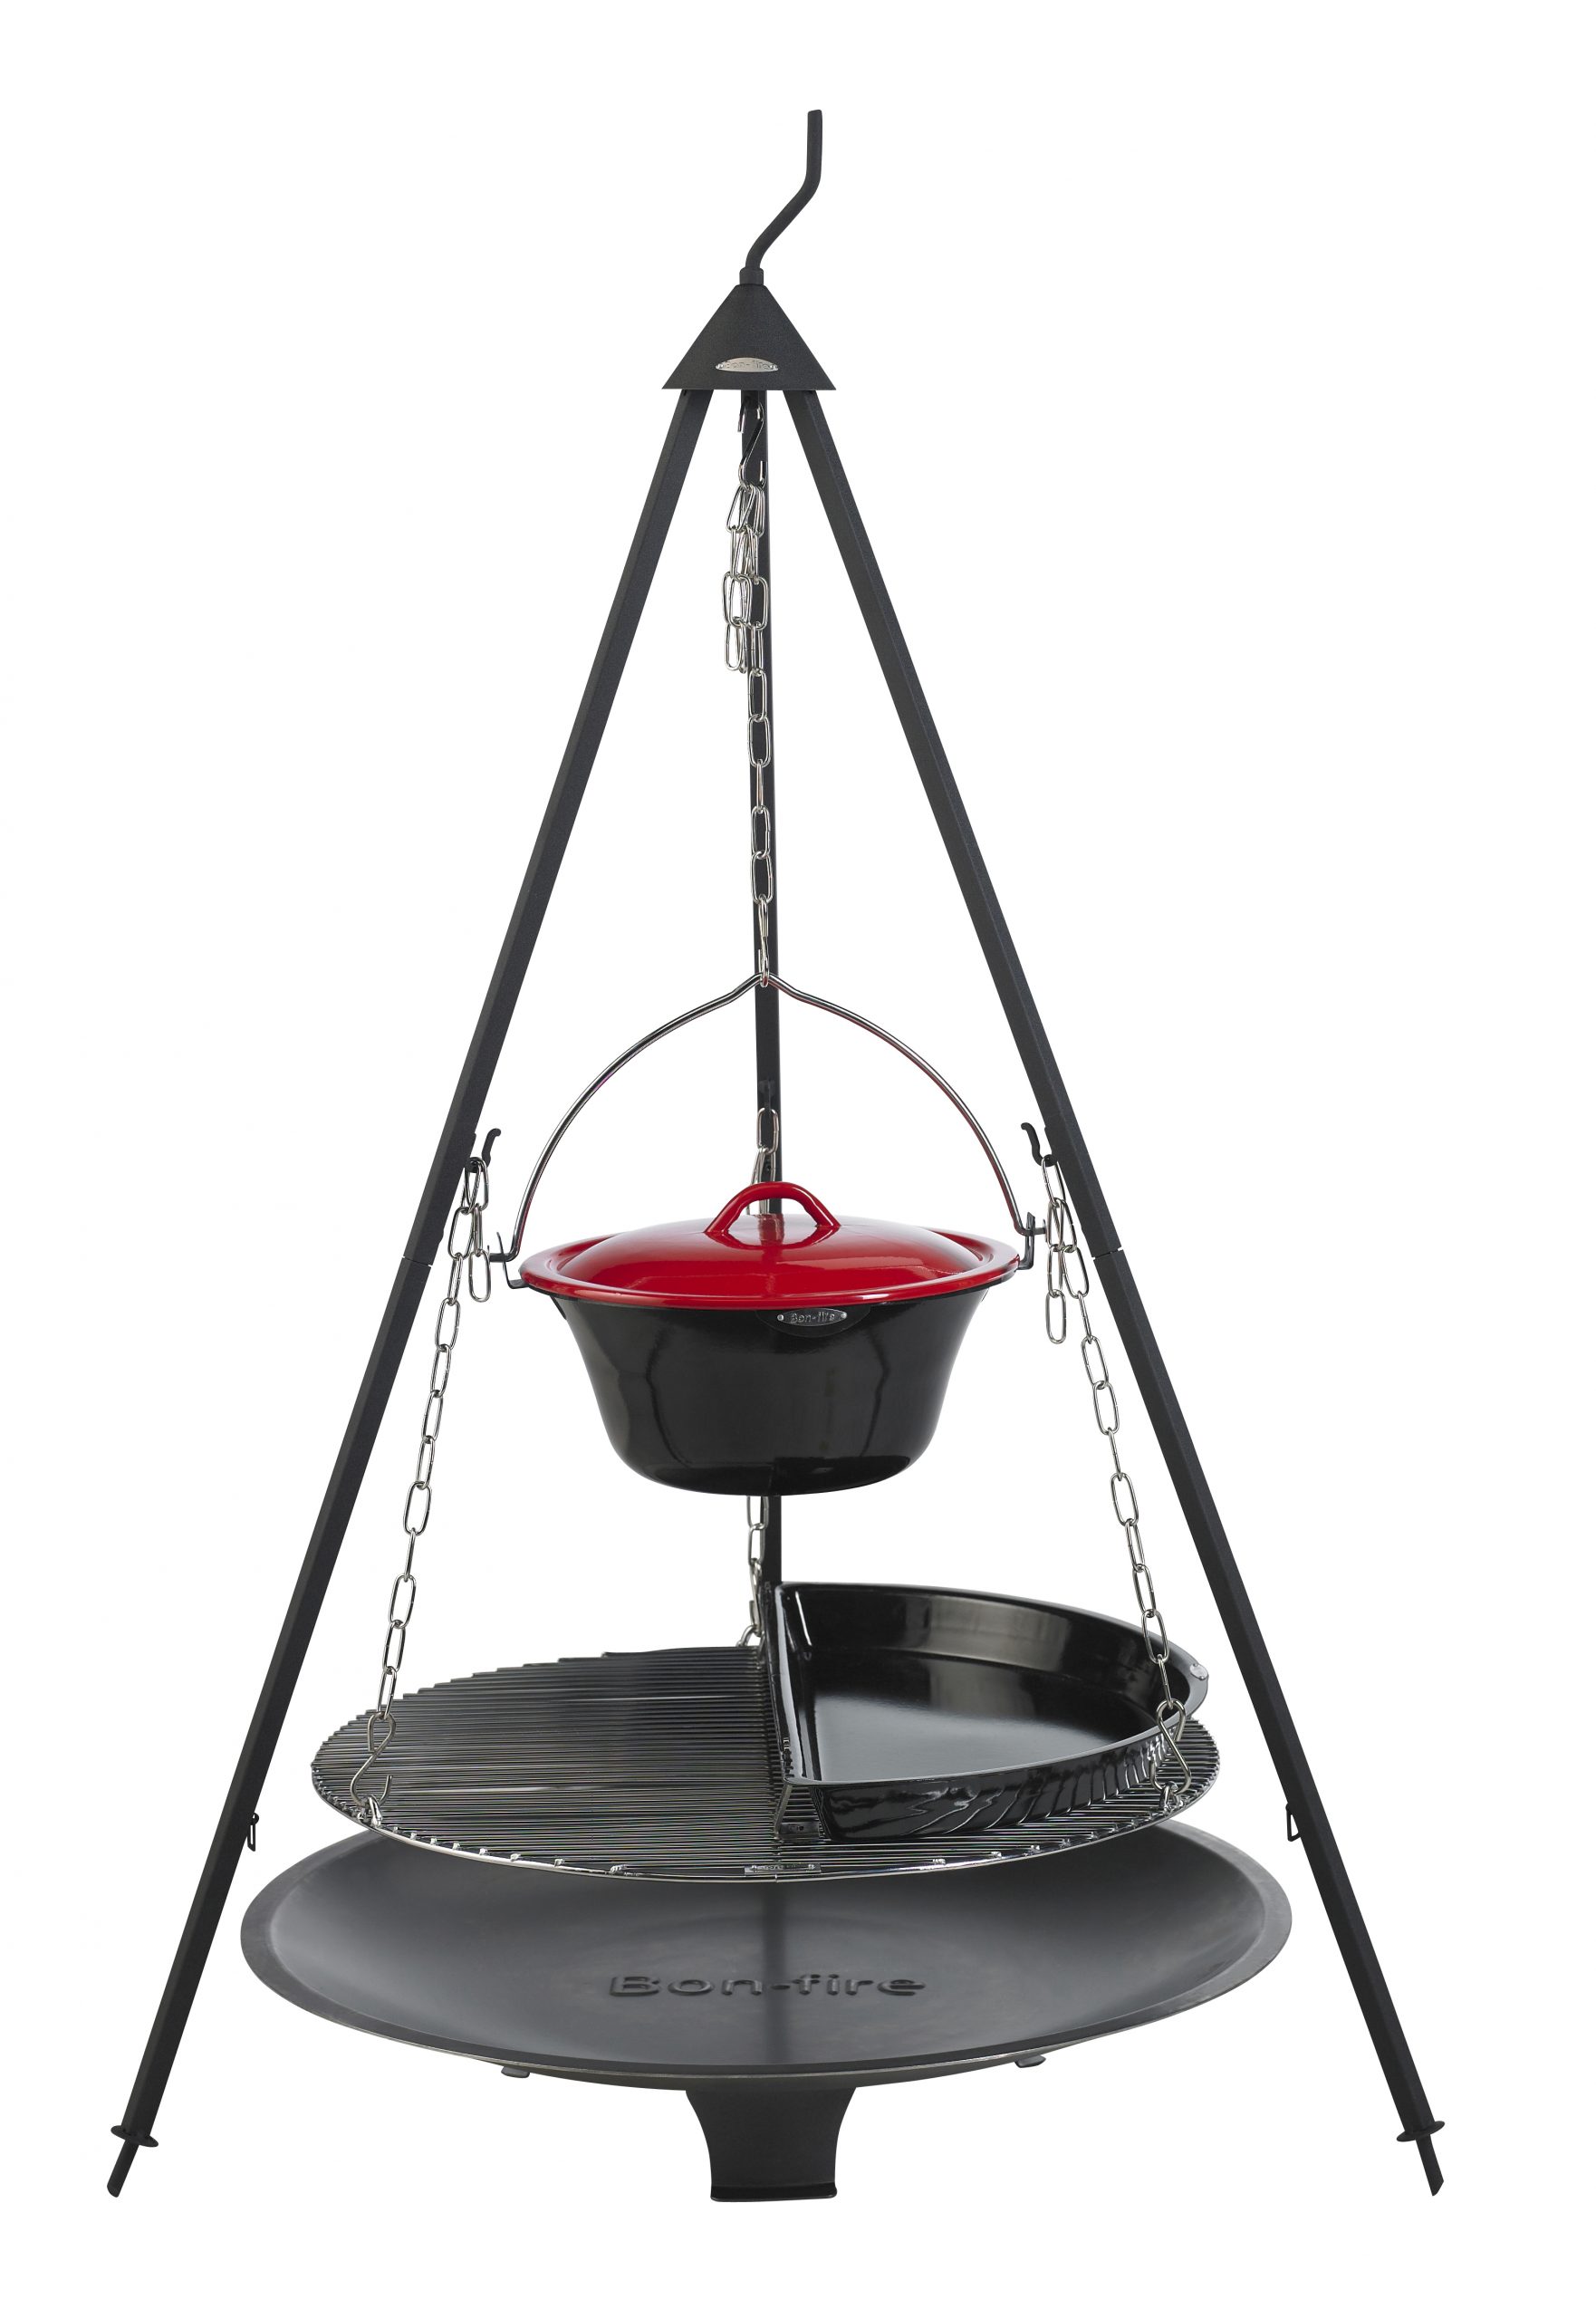 Bon-fire Brazier in steel and Basic set with Half BBQ pan and Stew pot.